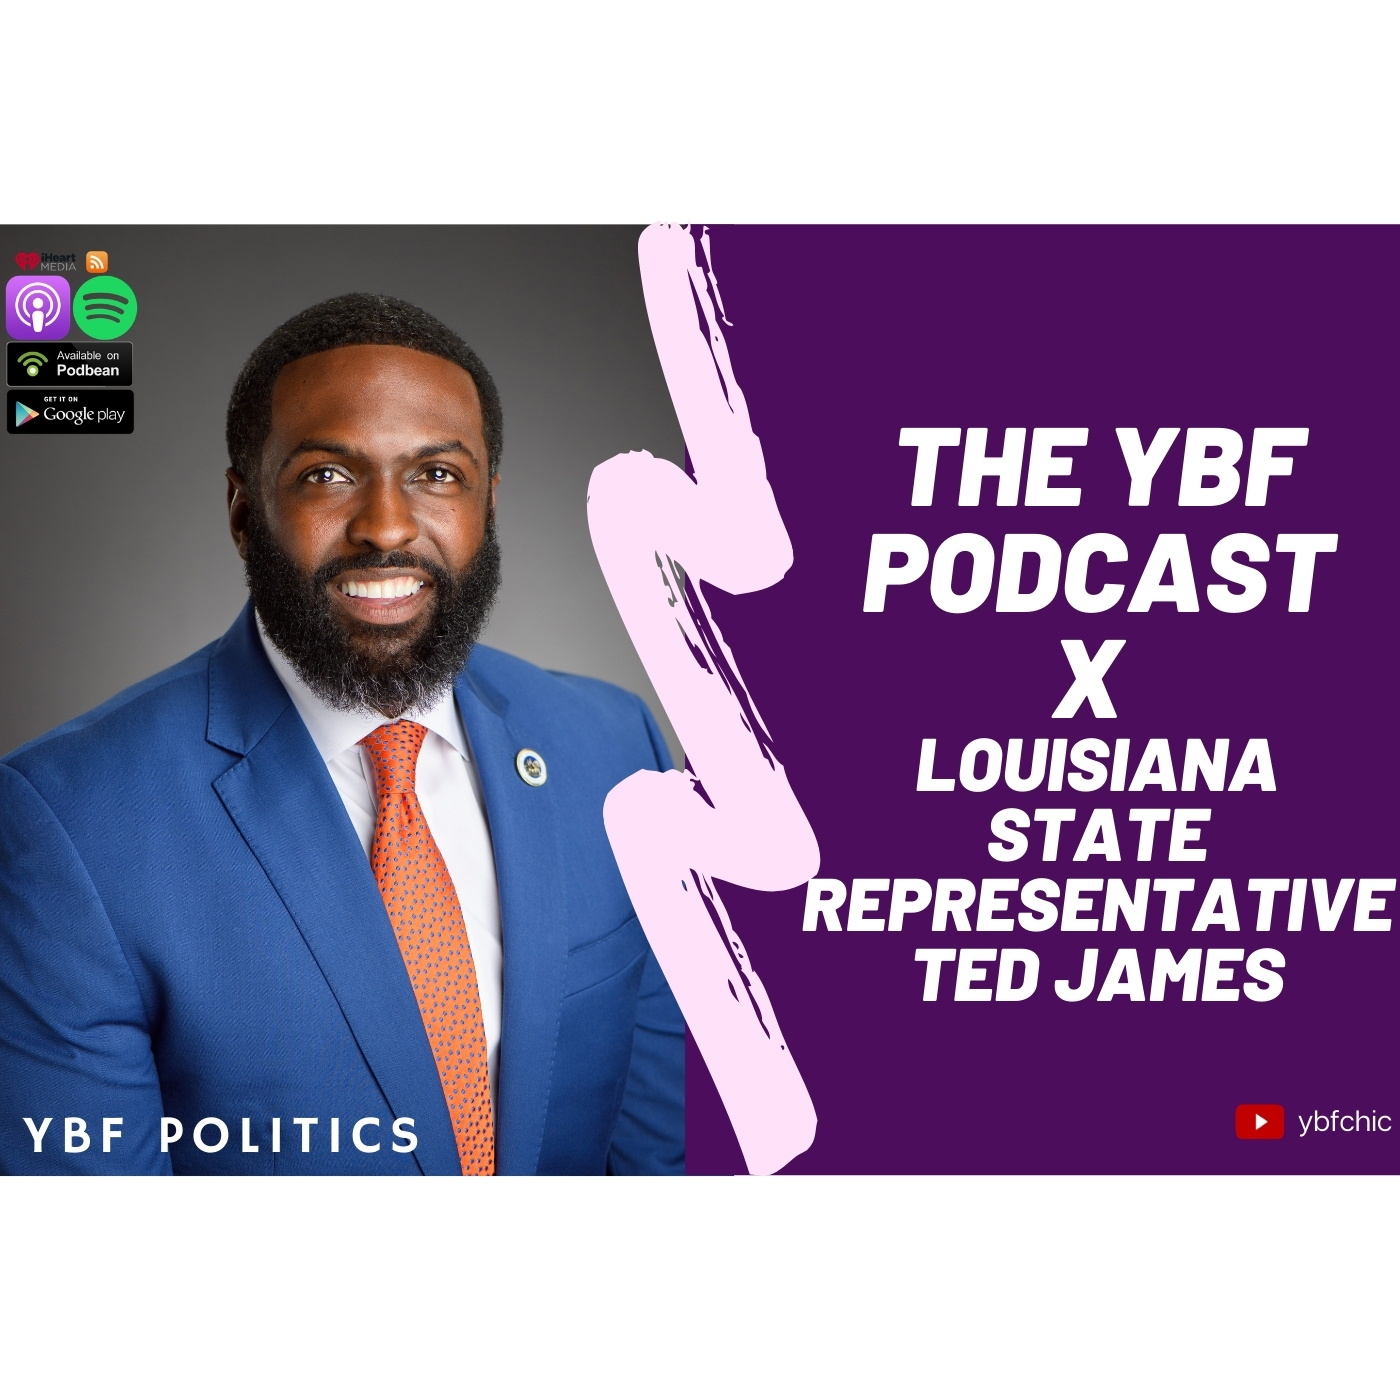 YBF POLITICS: Louisiana State Rep. Ted James Went Viral For His Epic READ Of Republican Co-Chair, Now We’re Getting Into Kamala, Racism, Toxic Masculinity & Justice Reform